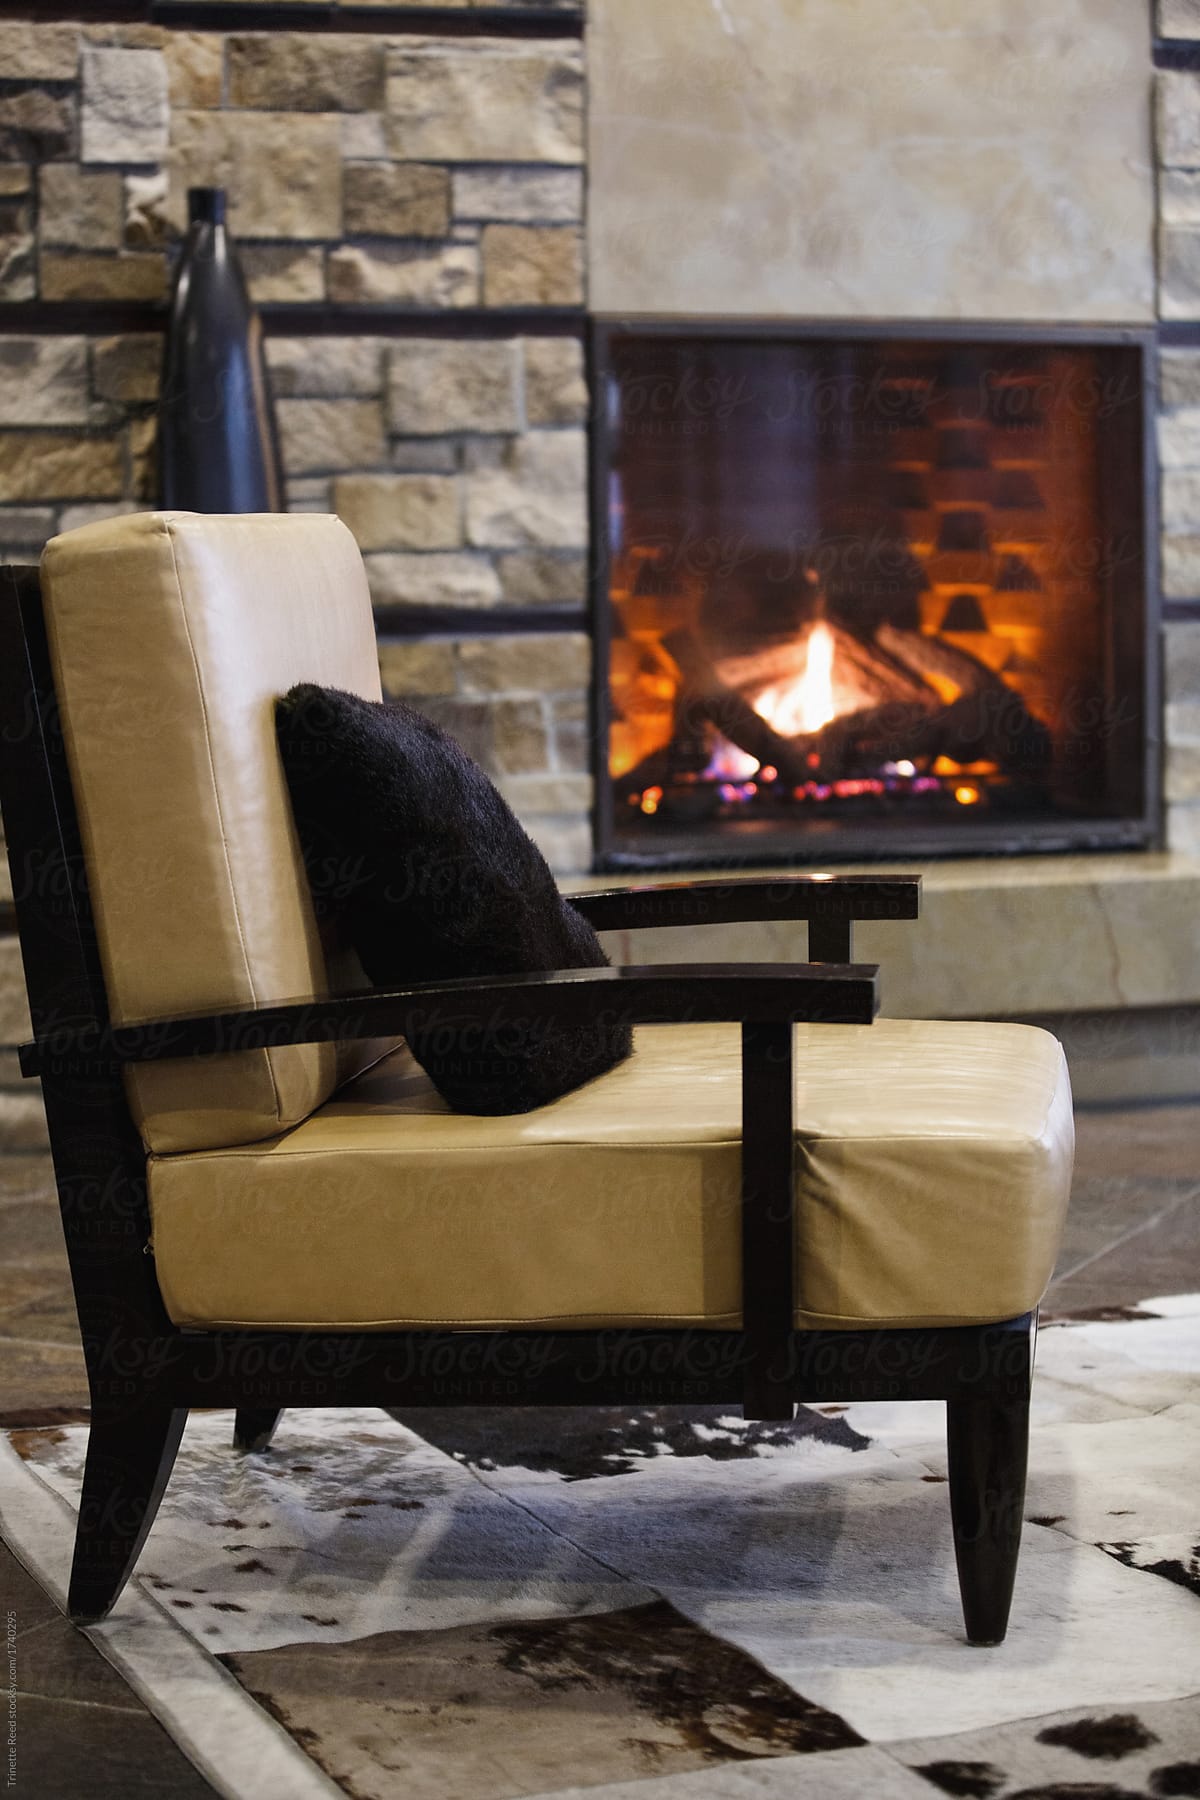 Chair at luxury ski resort by fireplace